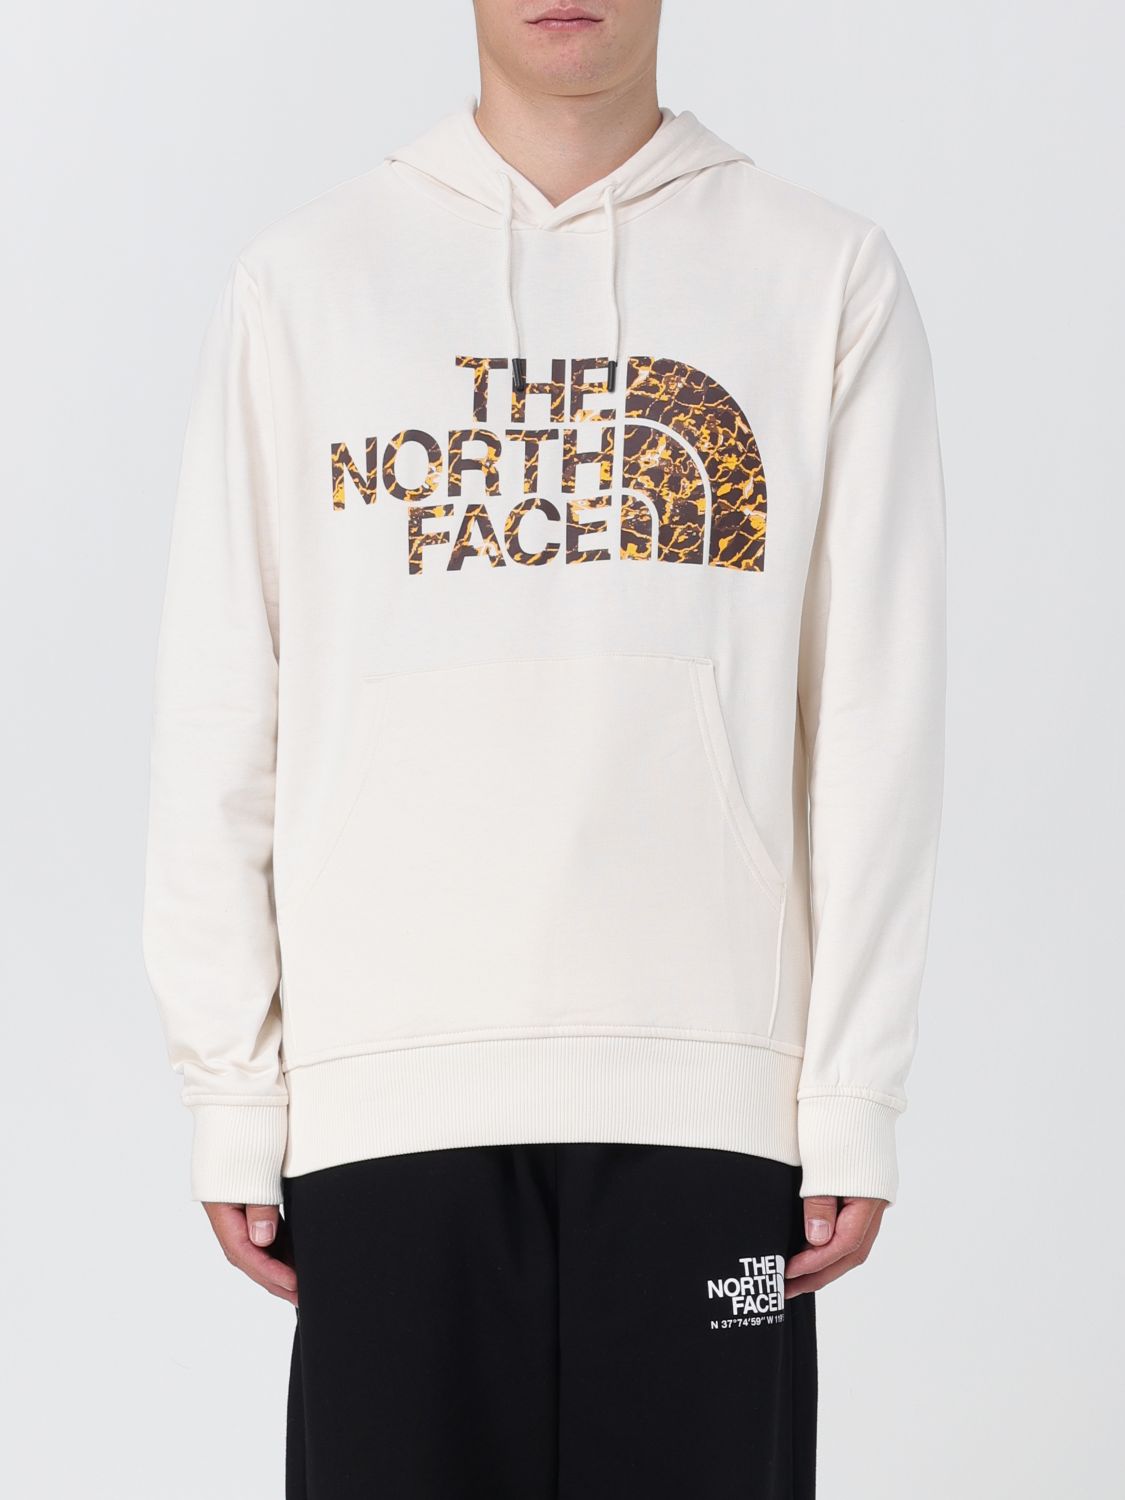 THE NORTH FACE 卫衣 THE NORTH FACE 男士 颜色 白色,e72892001